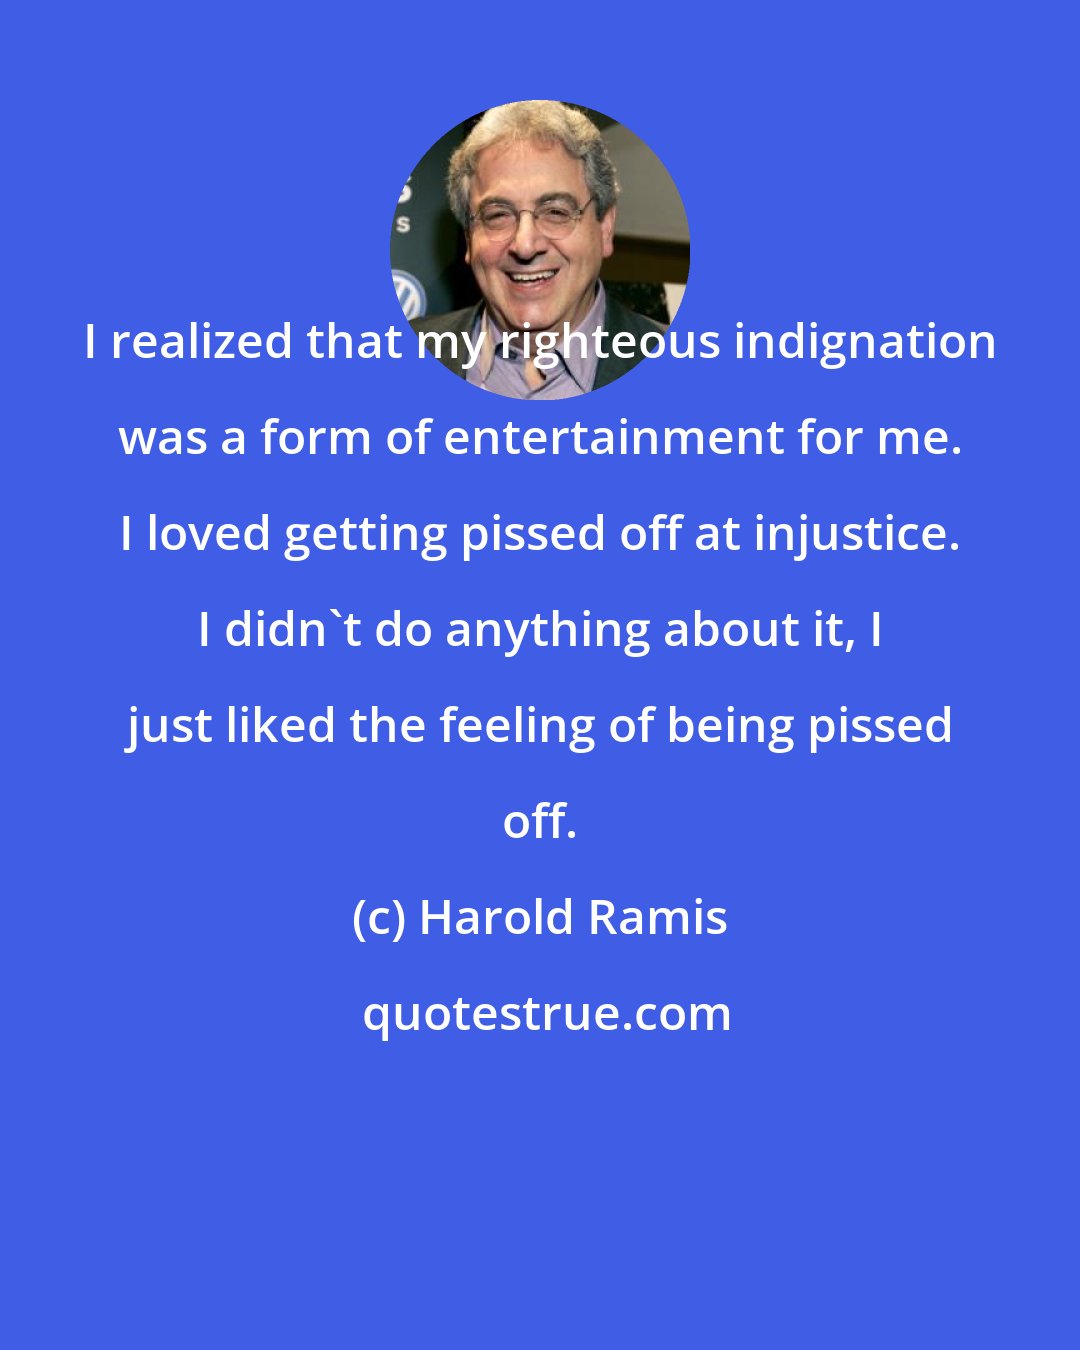 Harold Ramis: I realized that my righteous indignation was a form of entertainment for me. I loved getting pissed off at injustice. I didn't do anything about it, I just liked the feeling of being pissed off.